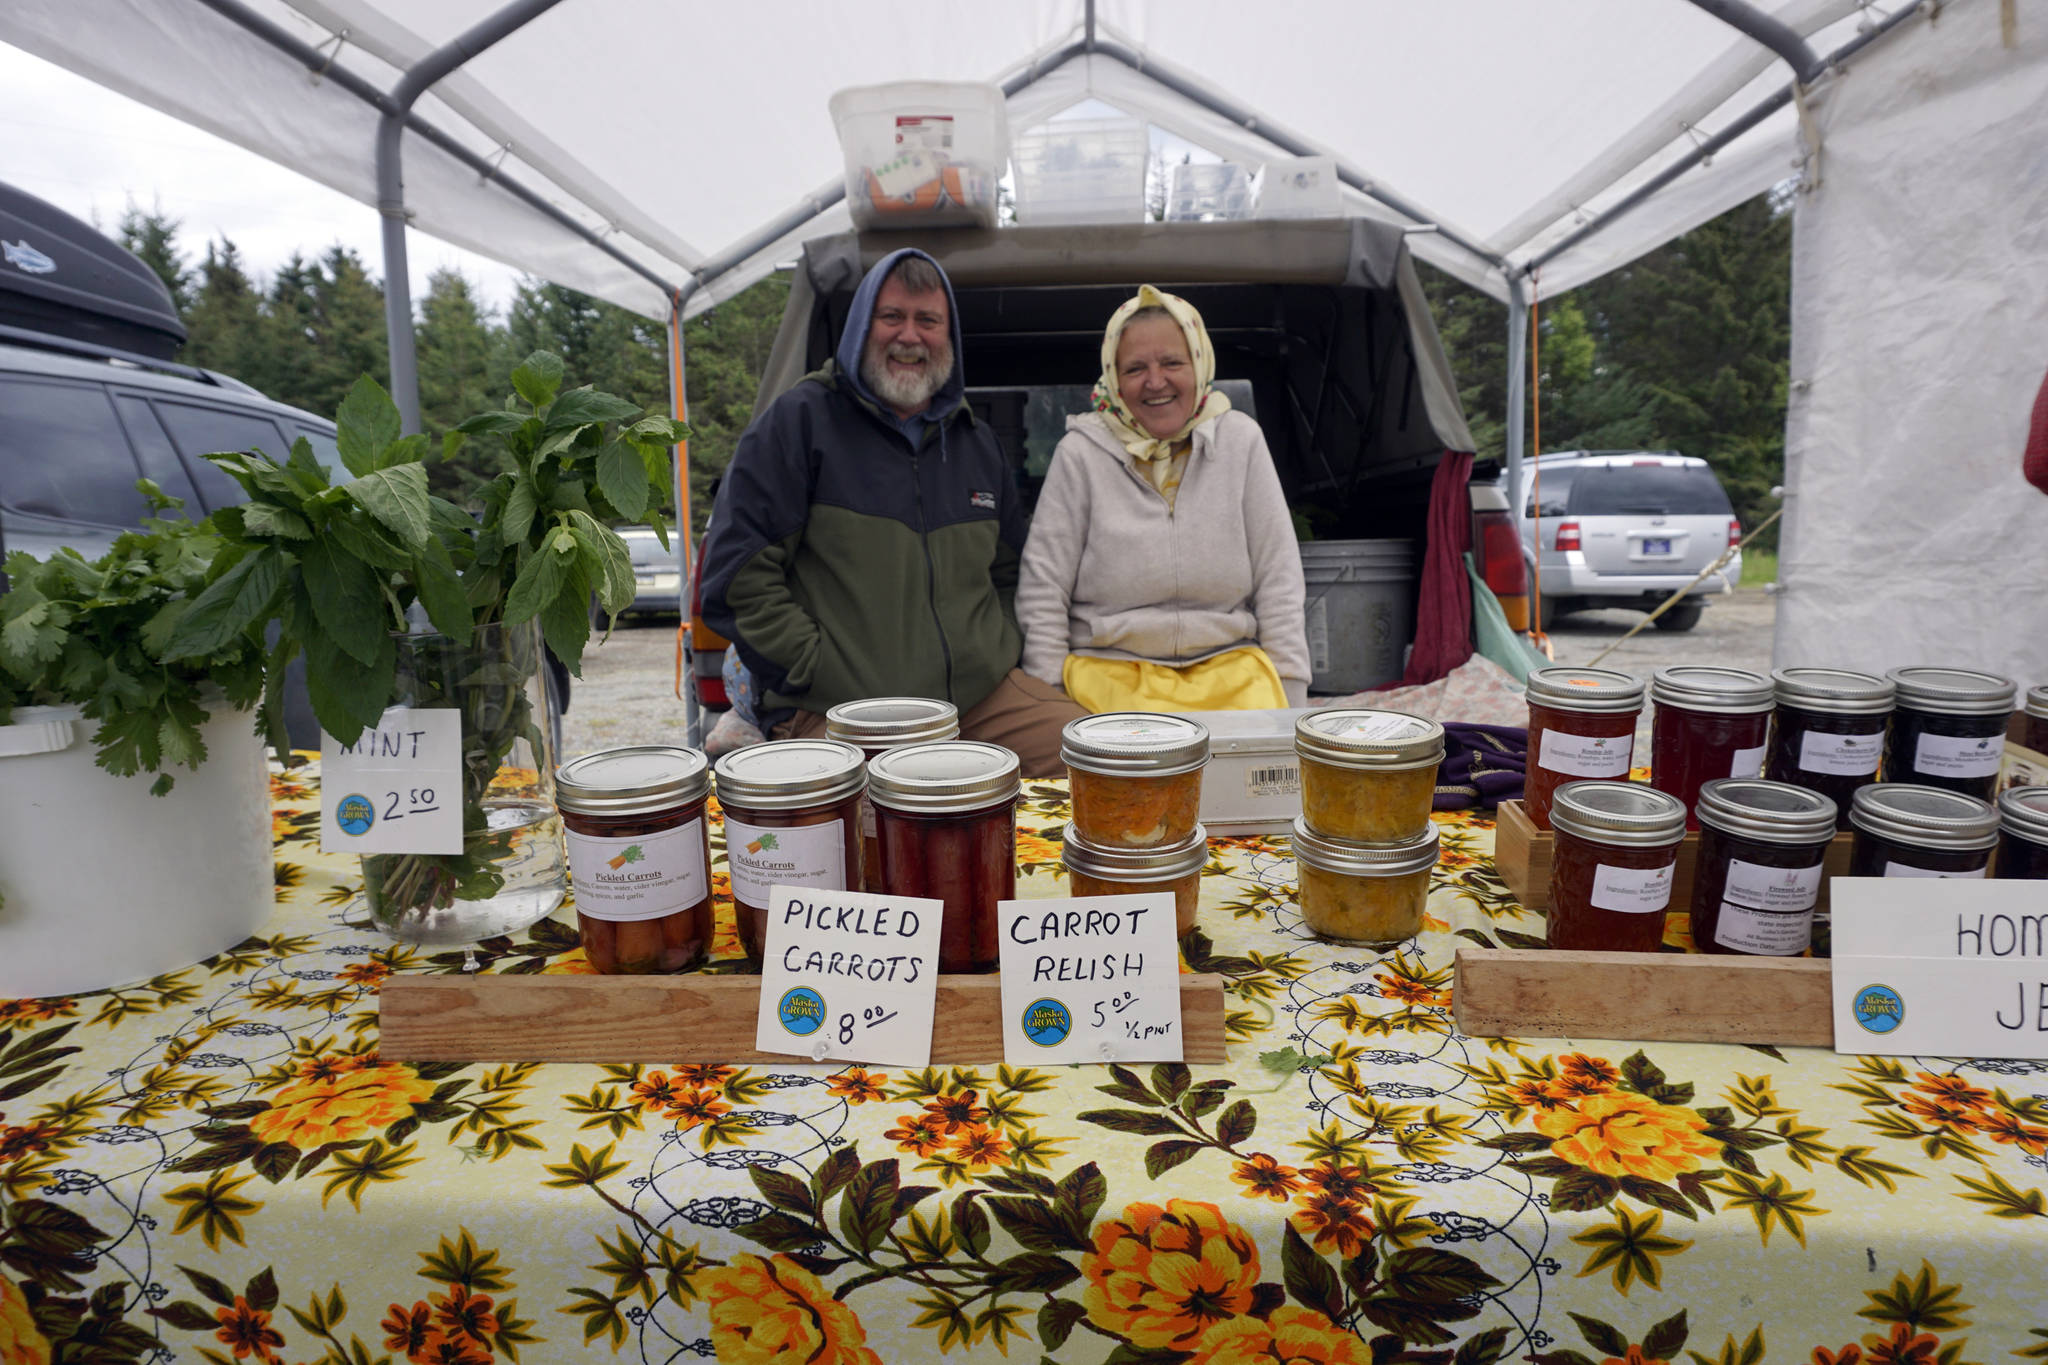 Dan and Luba Dorvall of Nikolaevsk start another season at the opening of the Homer Farmers Market on Saturday, May 25, 2019, in Homer, Alaska. (Photo by Michael Armstrong/Homer News)